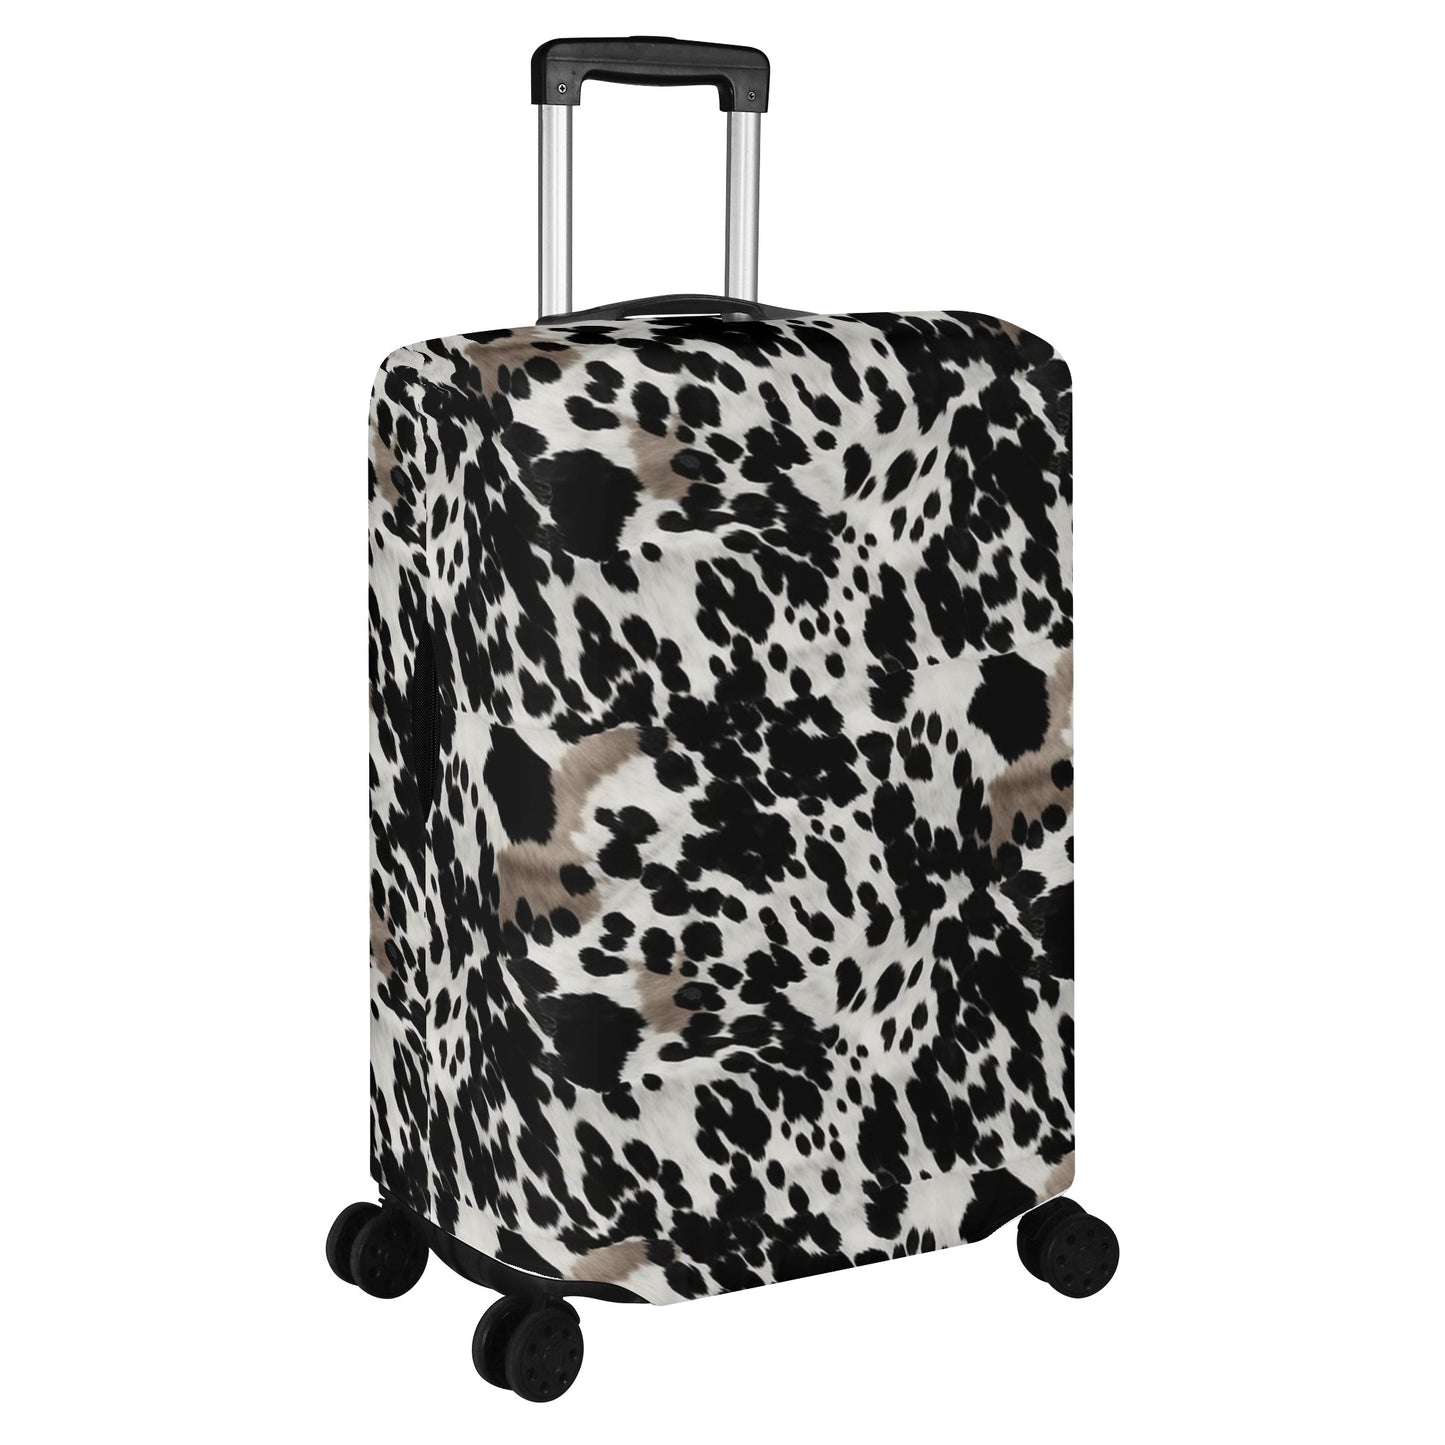 Cow Print Luggage Cover, Black White Brown Animal Suitcase Protector Hard Carry On Bag Washable Wrap Large Small Travel Aesthetic Gift